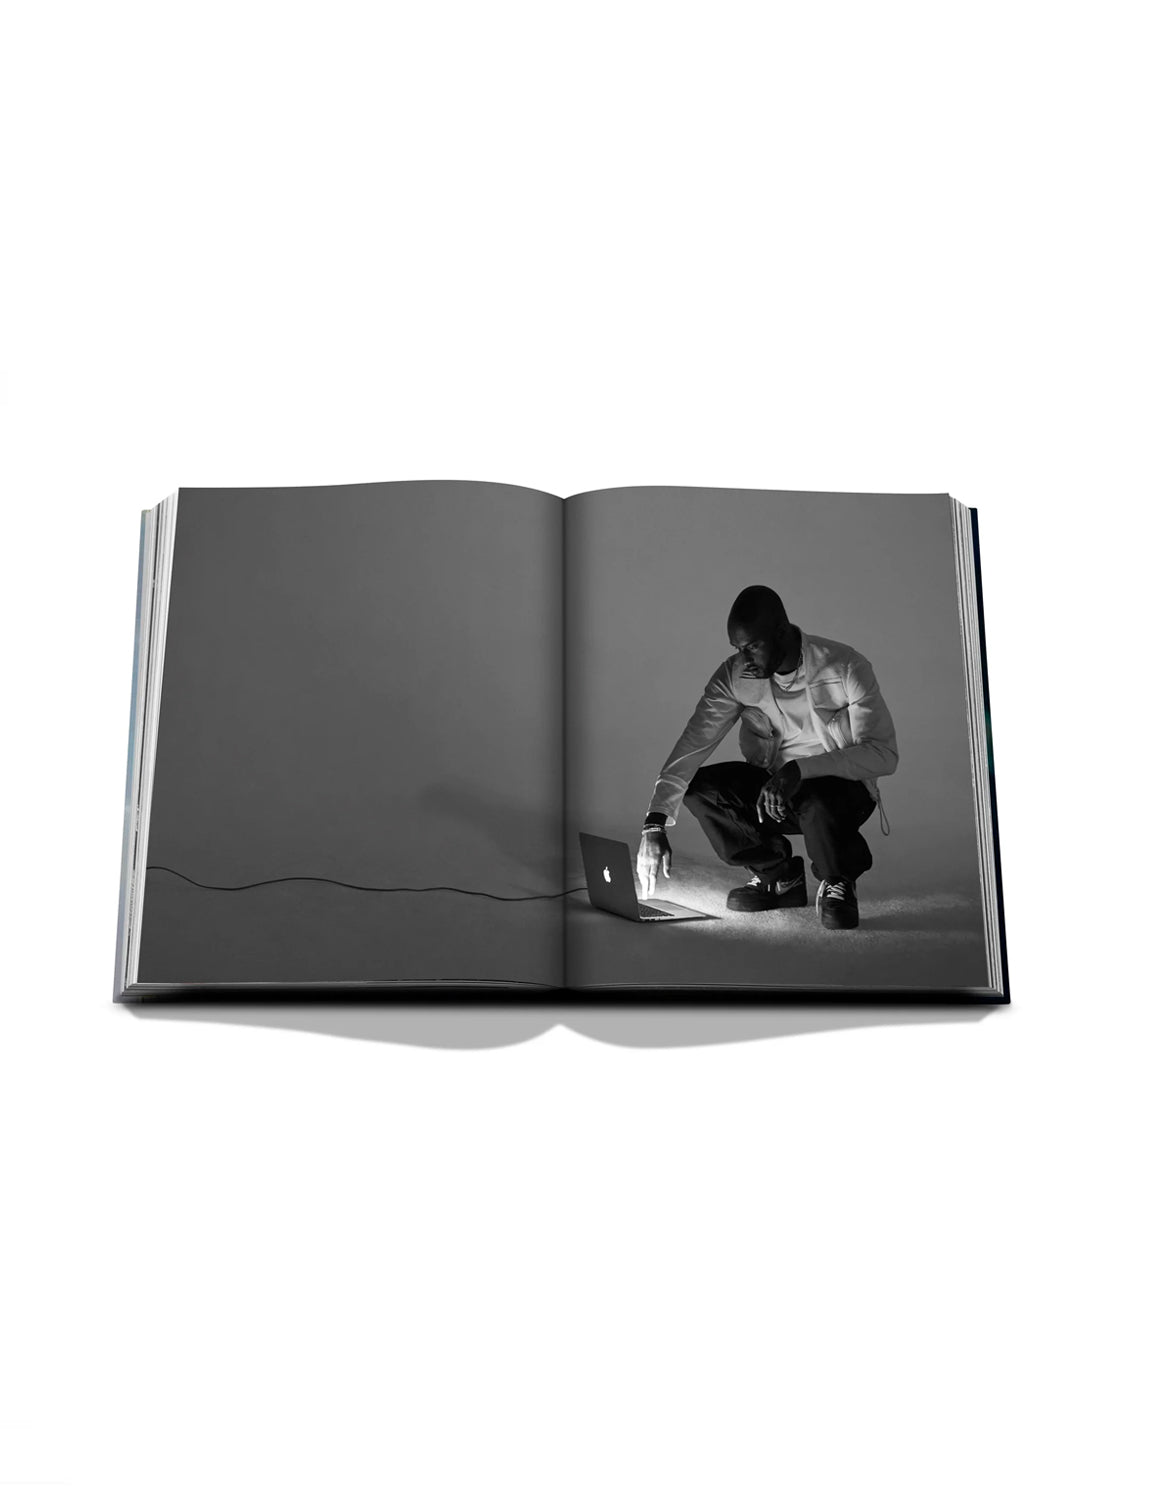 Louis Vuitton: Virgil Abloh (Ultimate Edition) by Anders Christian Madsen -  Coffee Table Book